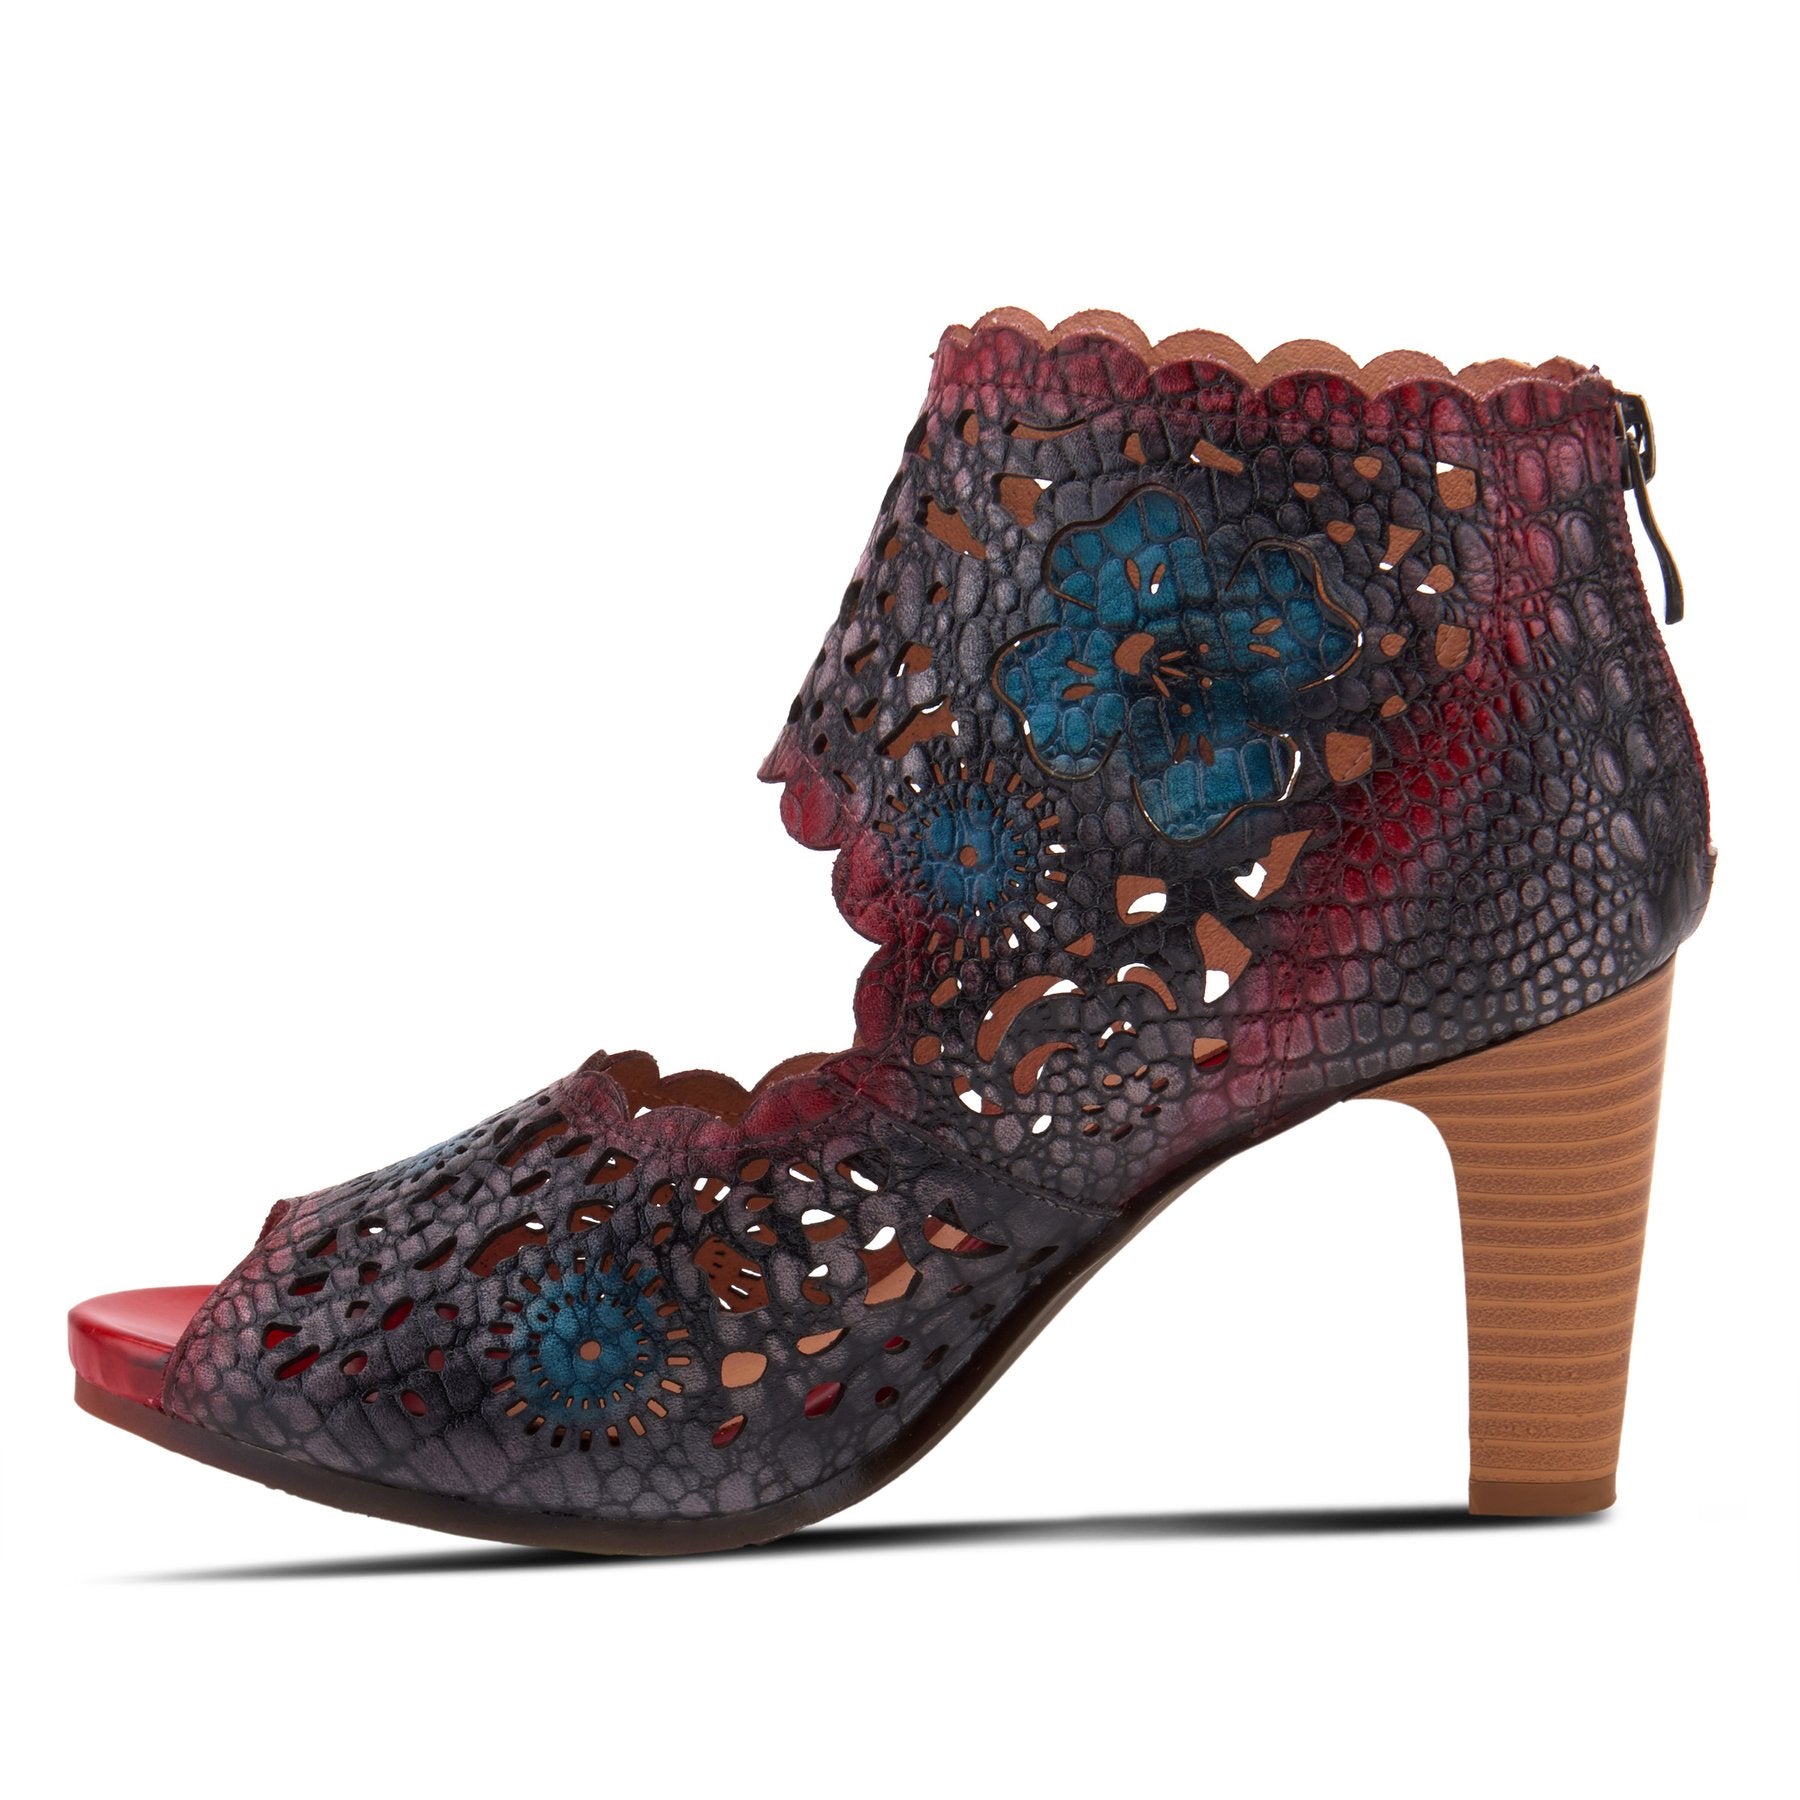 Inner side view of the l'artiste loverlee high heel sandal. This sandal is purple, blue, and red. It has laser cutout flower designs all over it and scalloped edges. The shoe is open toe and exposes the instep of the foot while covering the rest.